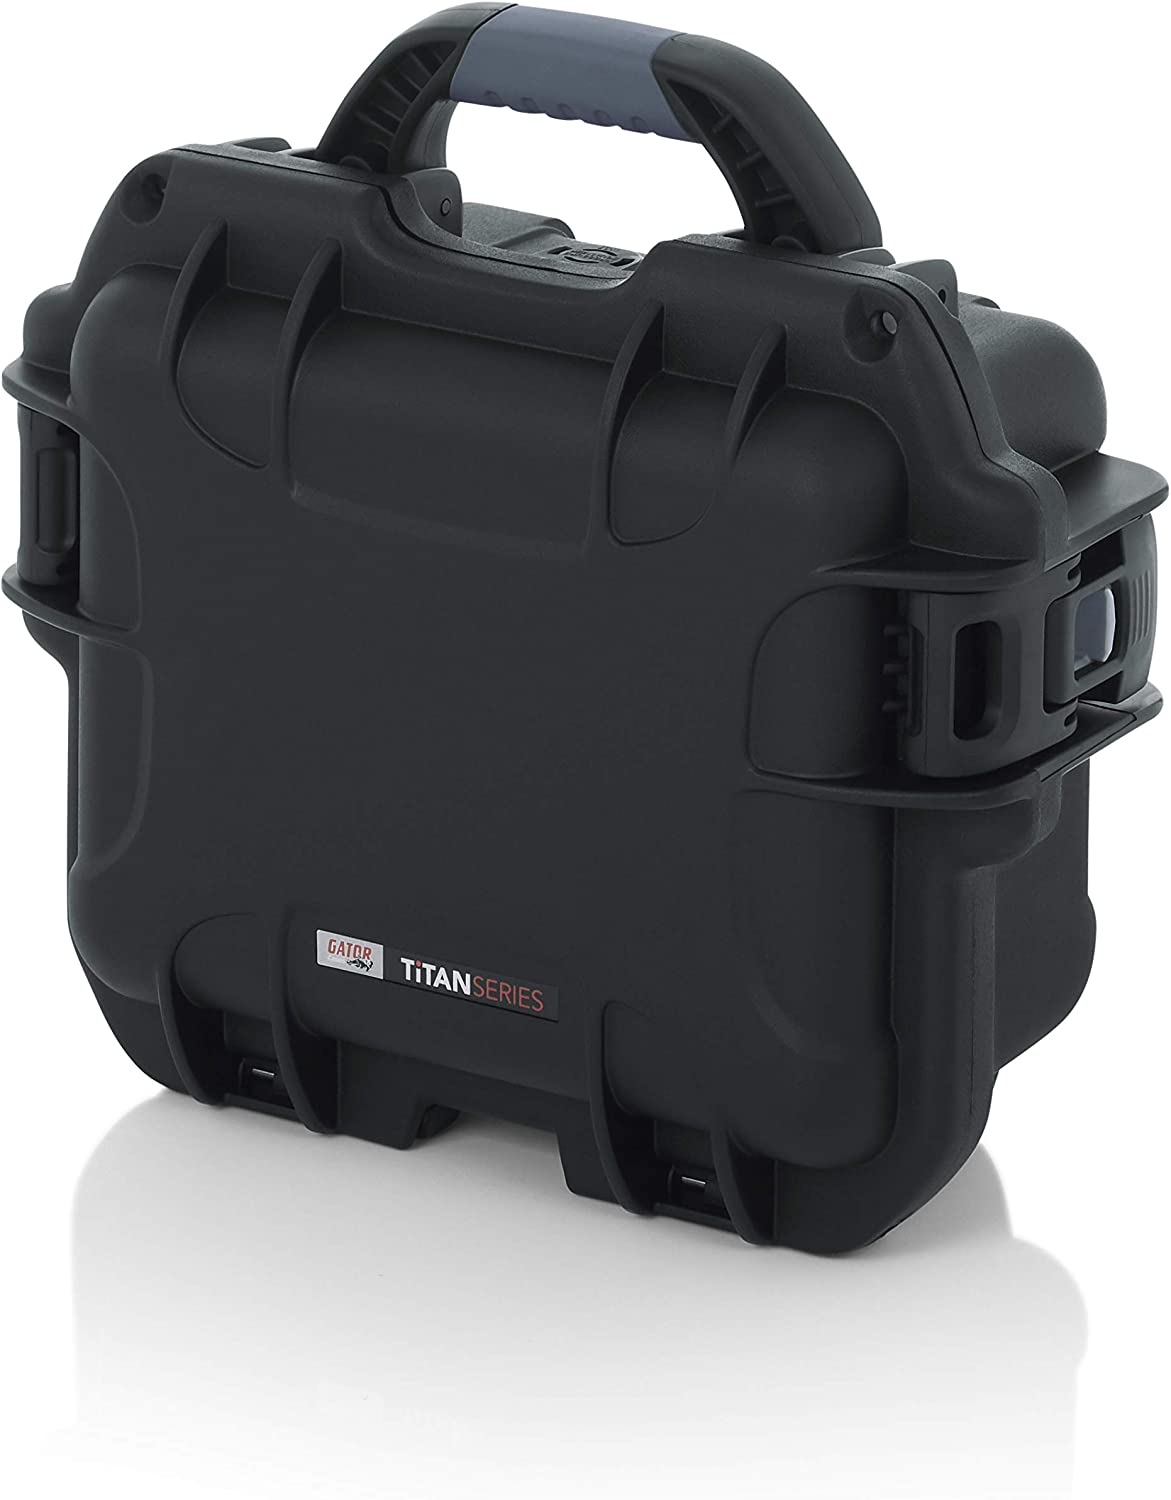 Gator Cases Titan Series Water Proof Case for Shure Wireless Mic Systems - Pro-Distributing